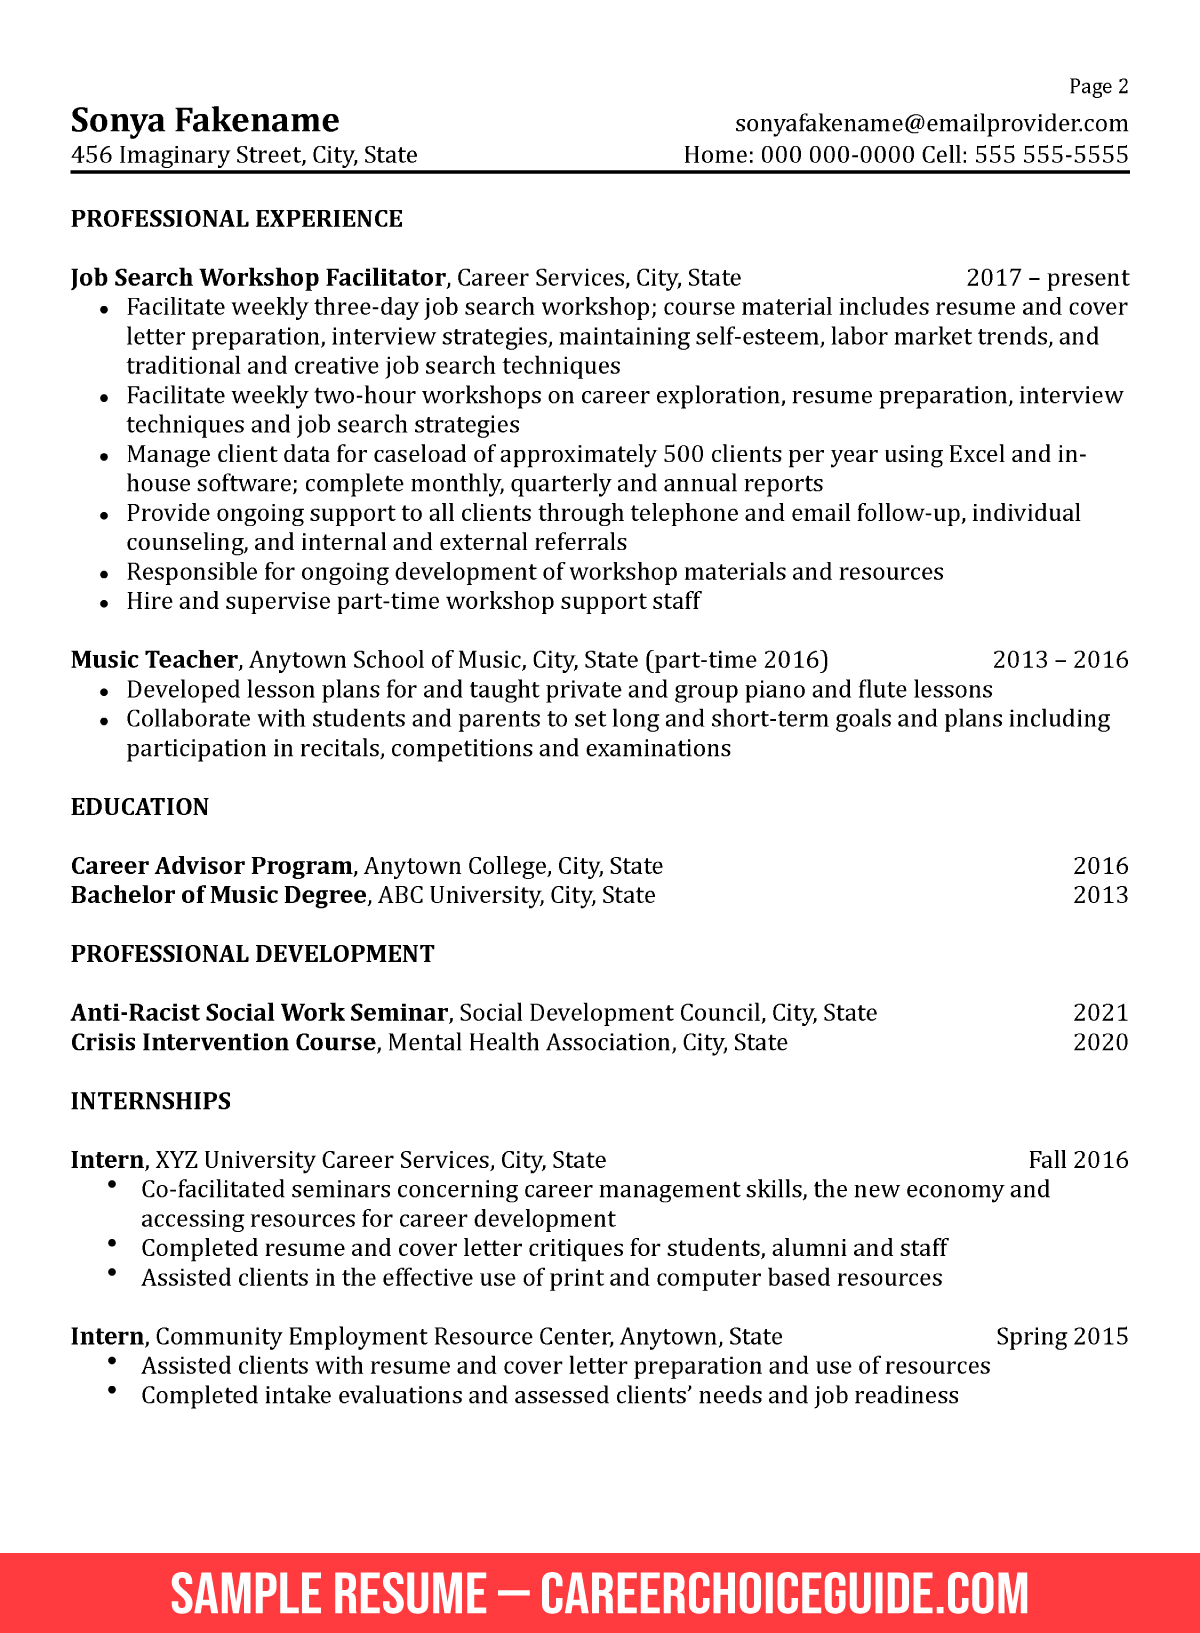 objective statement resume counselor